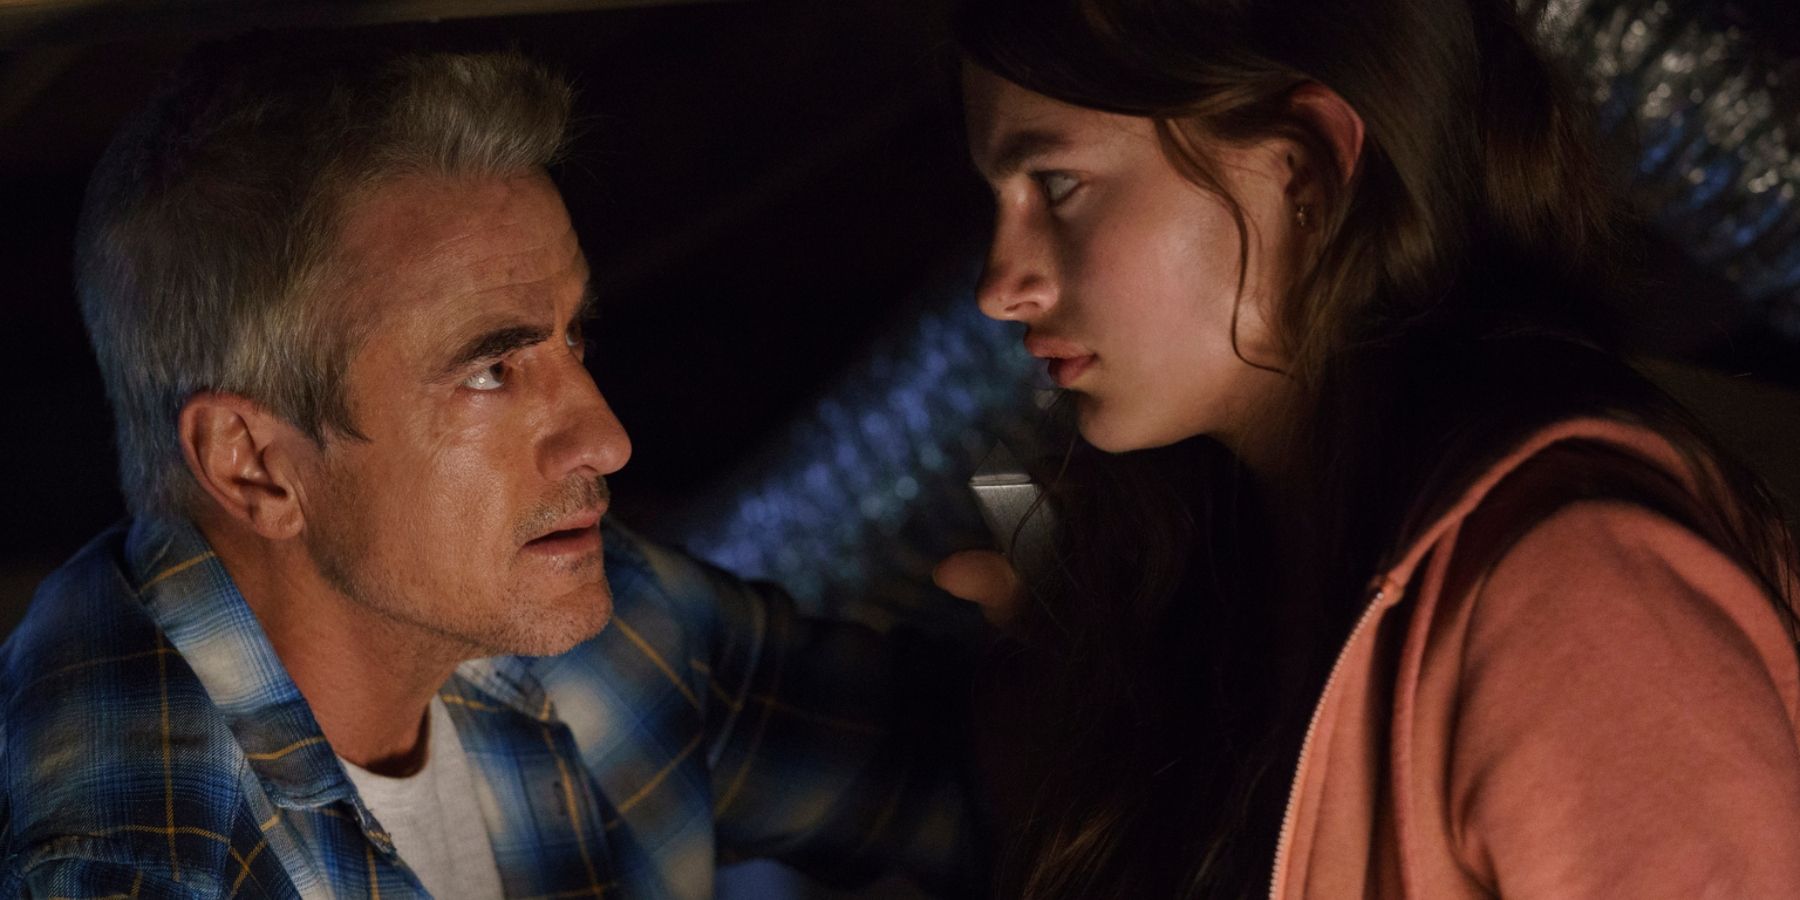 Dermot Mulroney and Diana Silvers in Blumhouse Into The Dark "Flesh and Blood" episode